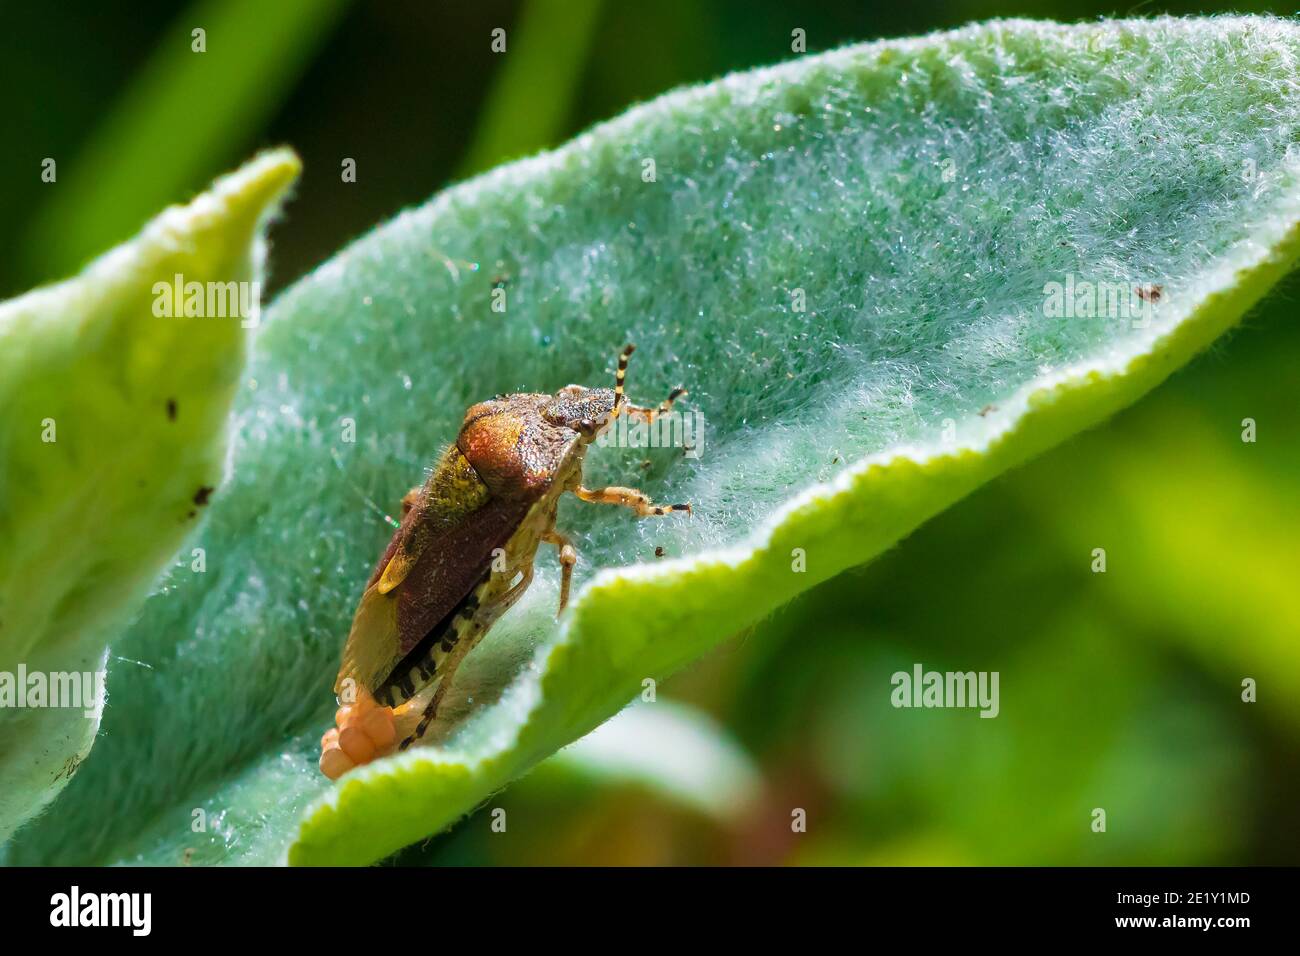 Closeup of a Sloe Bug insect, Dolycoris baccarum, laying eggs in vegetation. Stock Photo